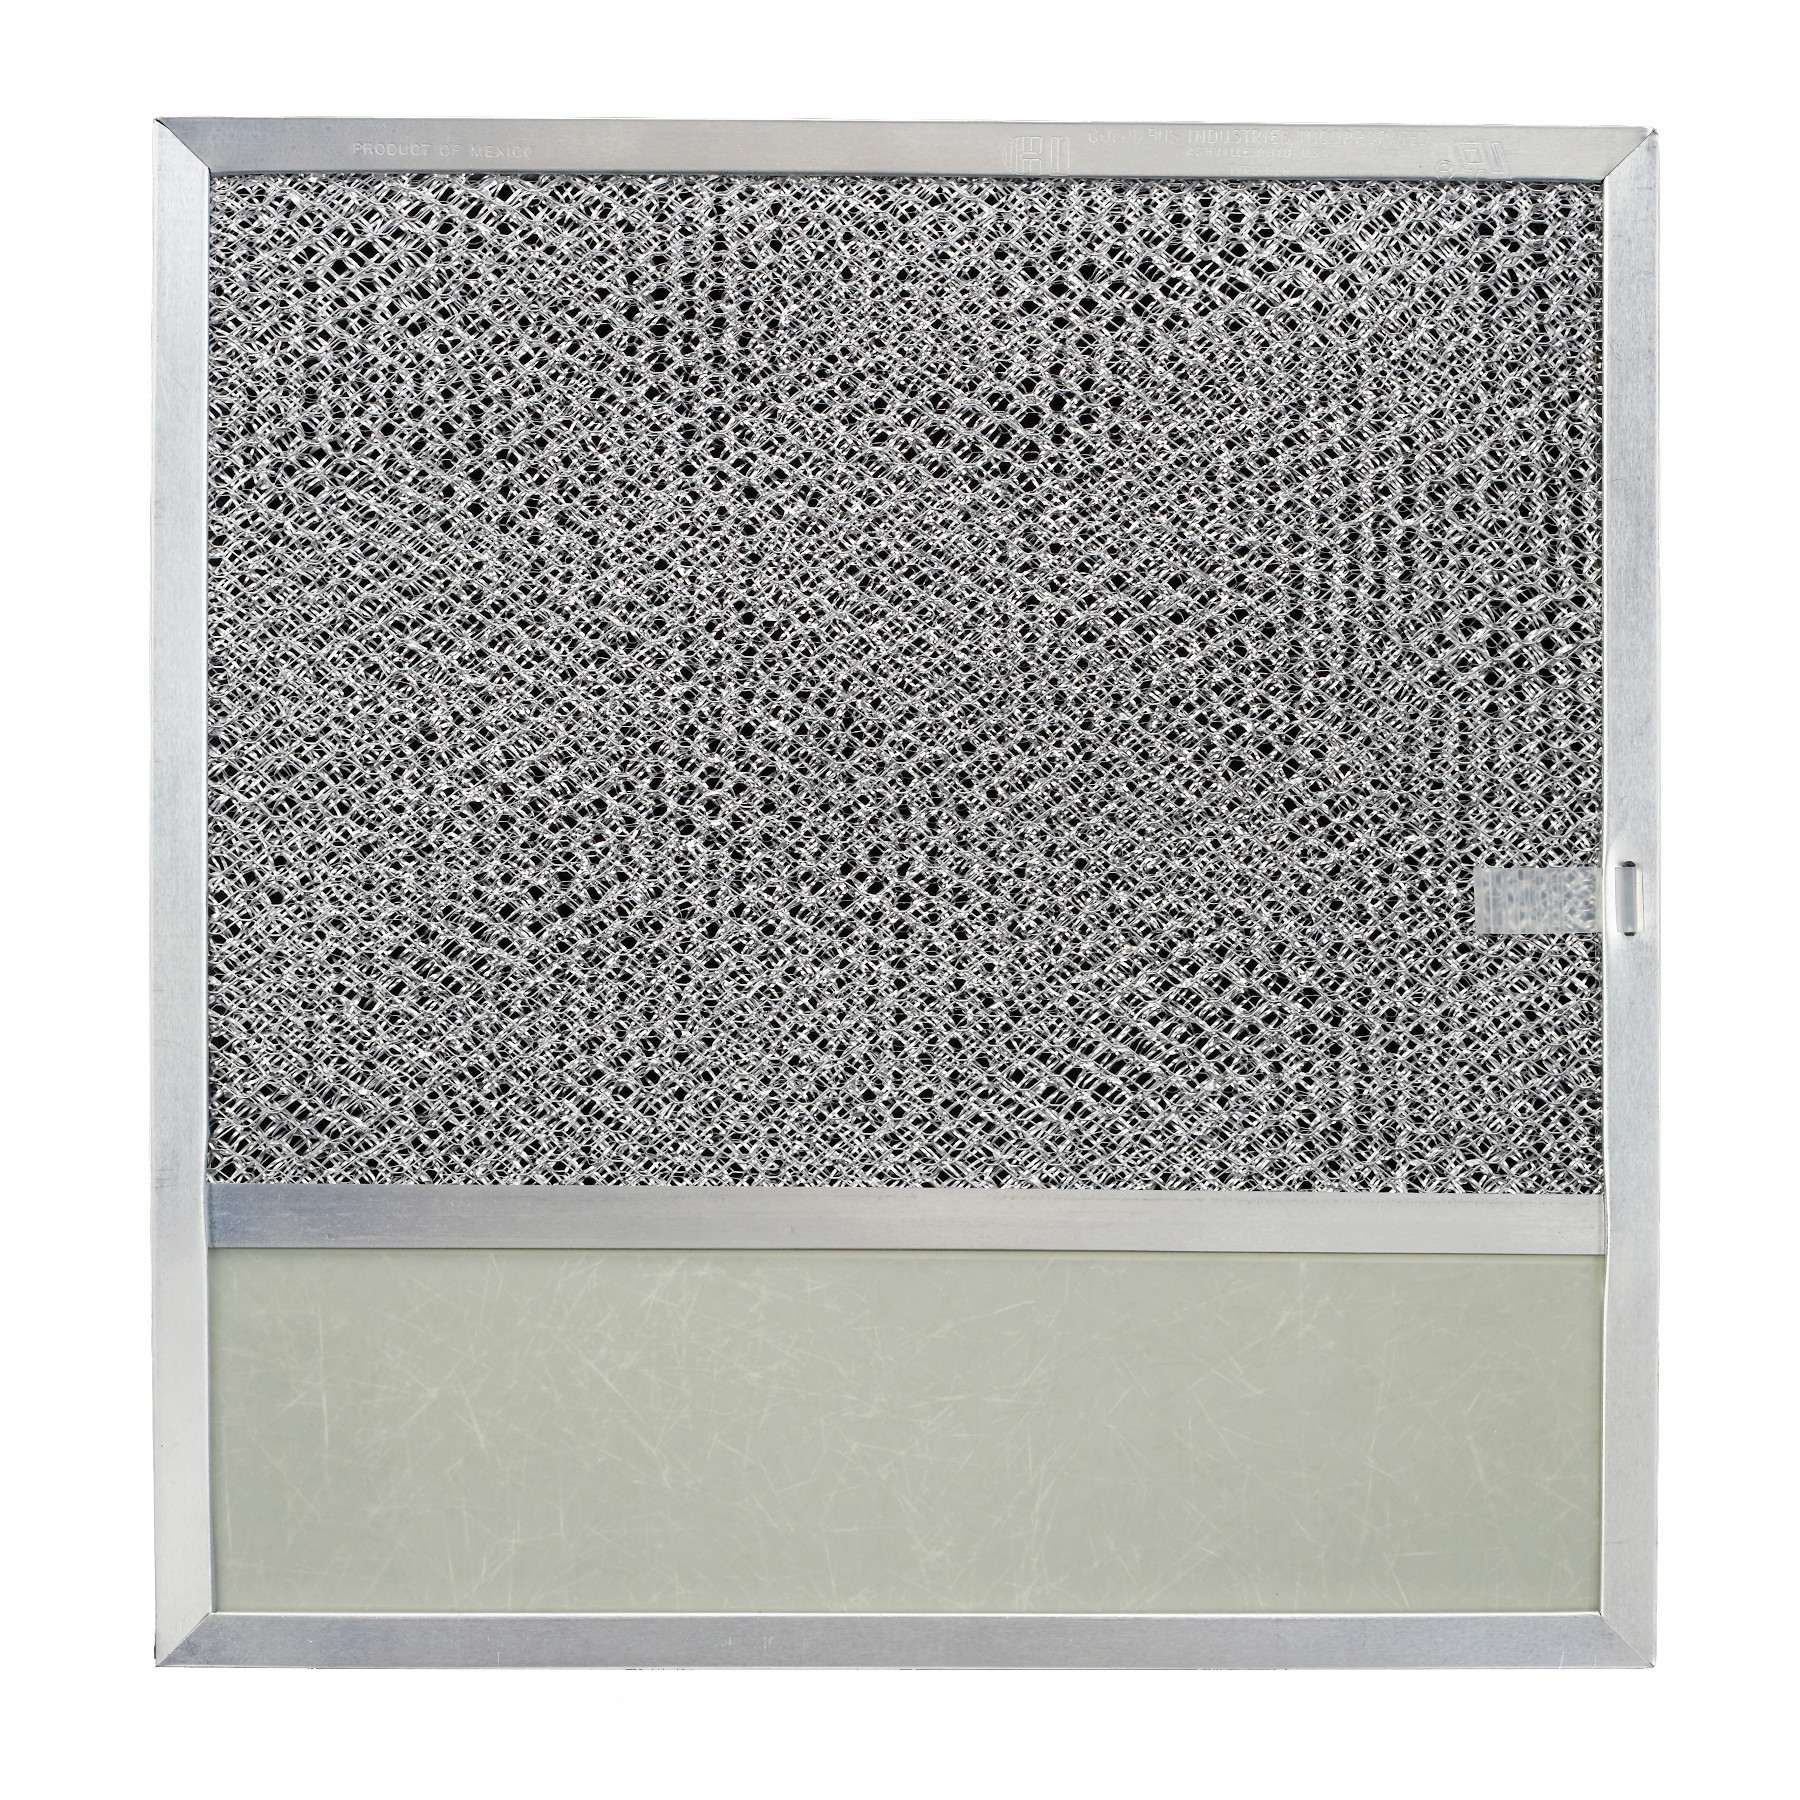 Broan-NuTone® Genuine Replacement Aluminum Filter for Range Hoods, 11-3/8" X 11-3/4", Fits Select Models